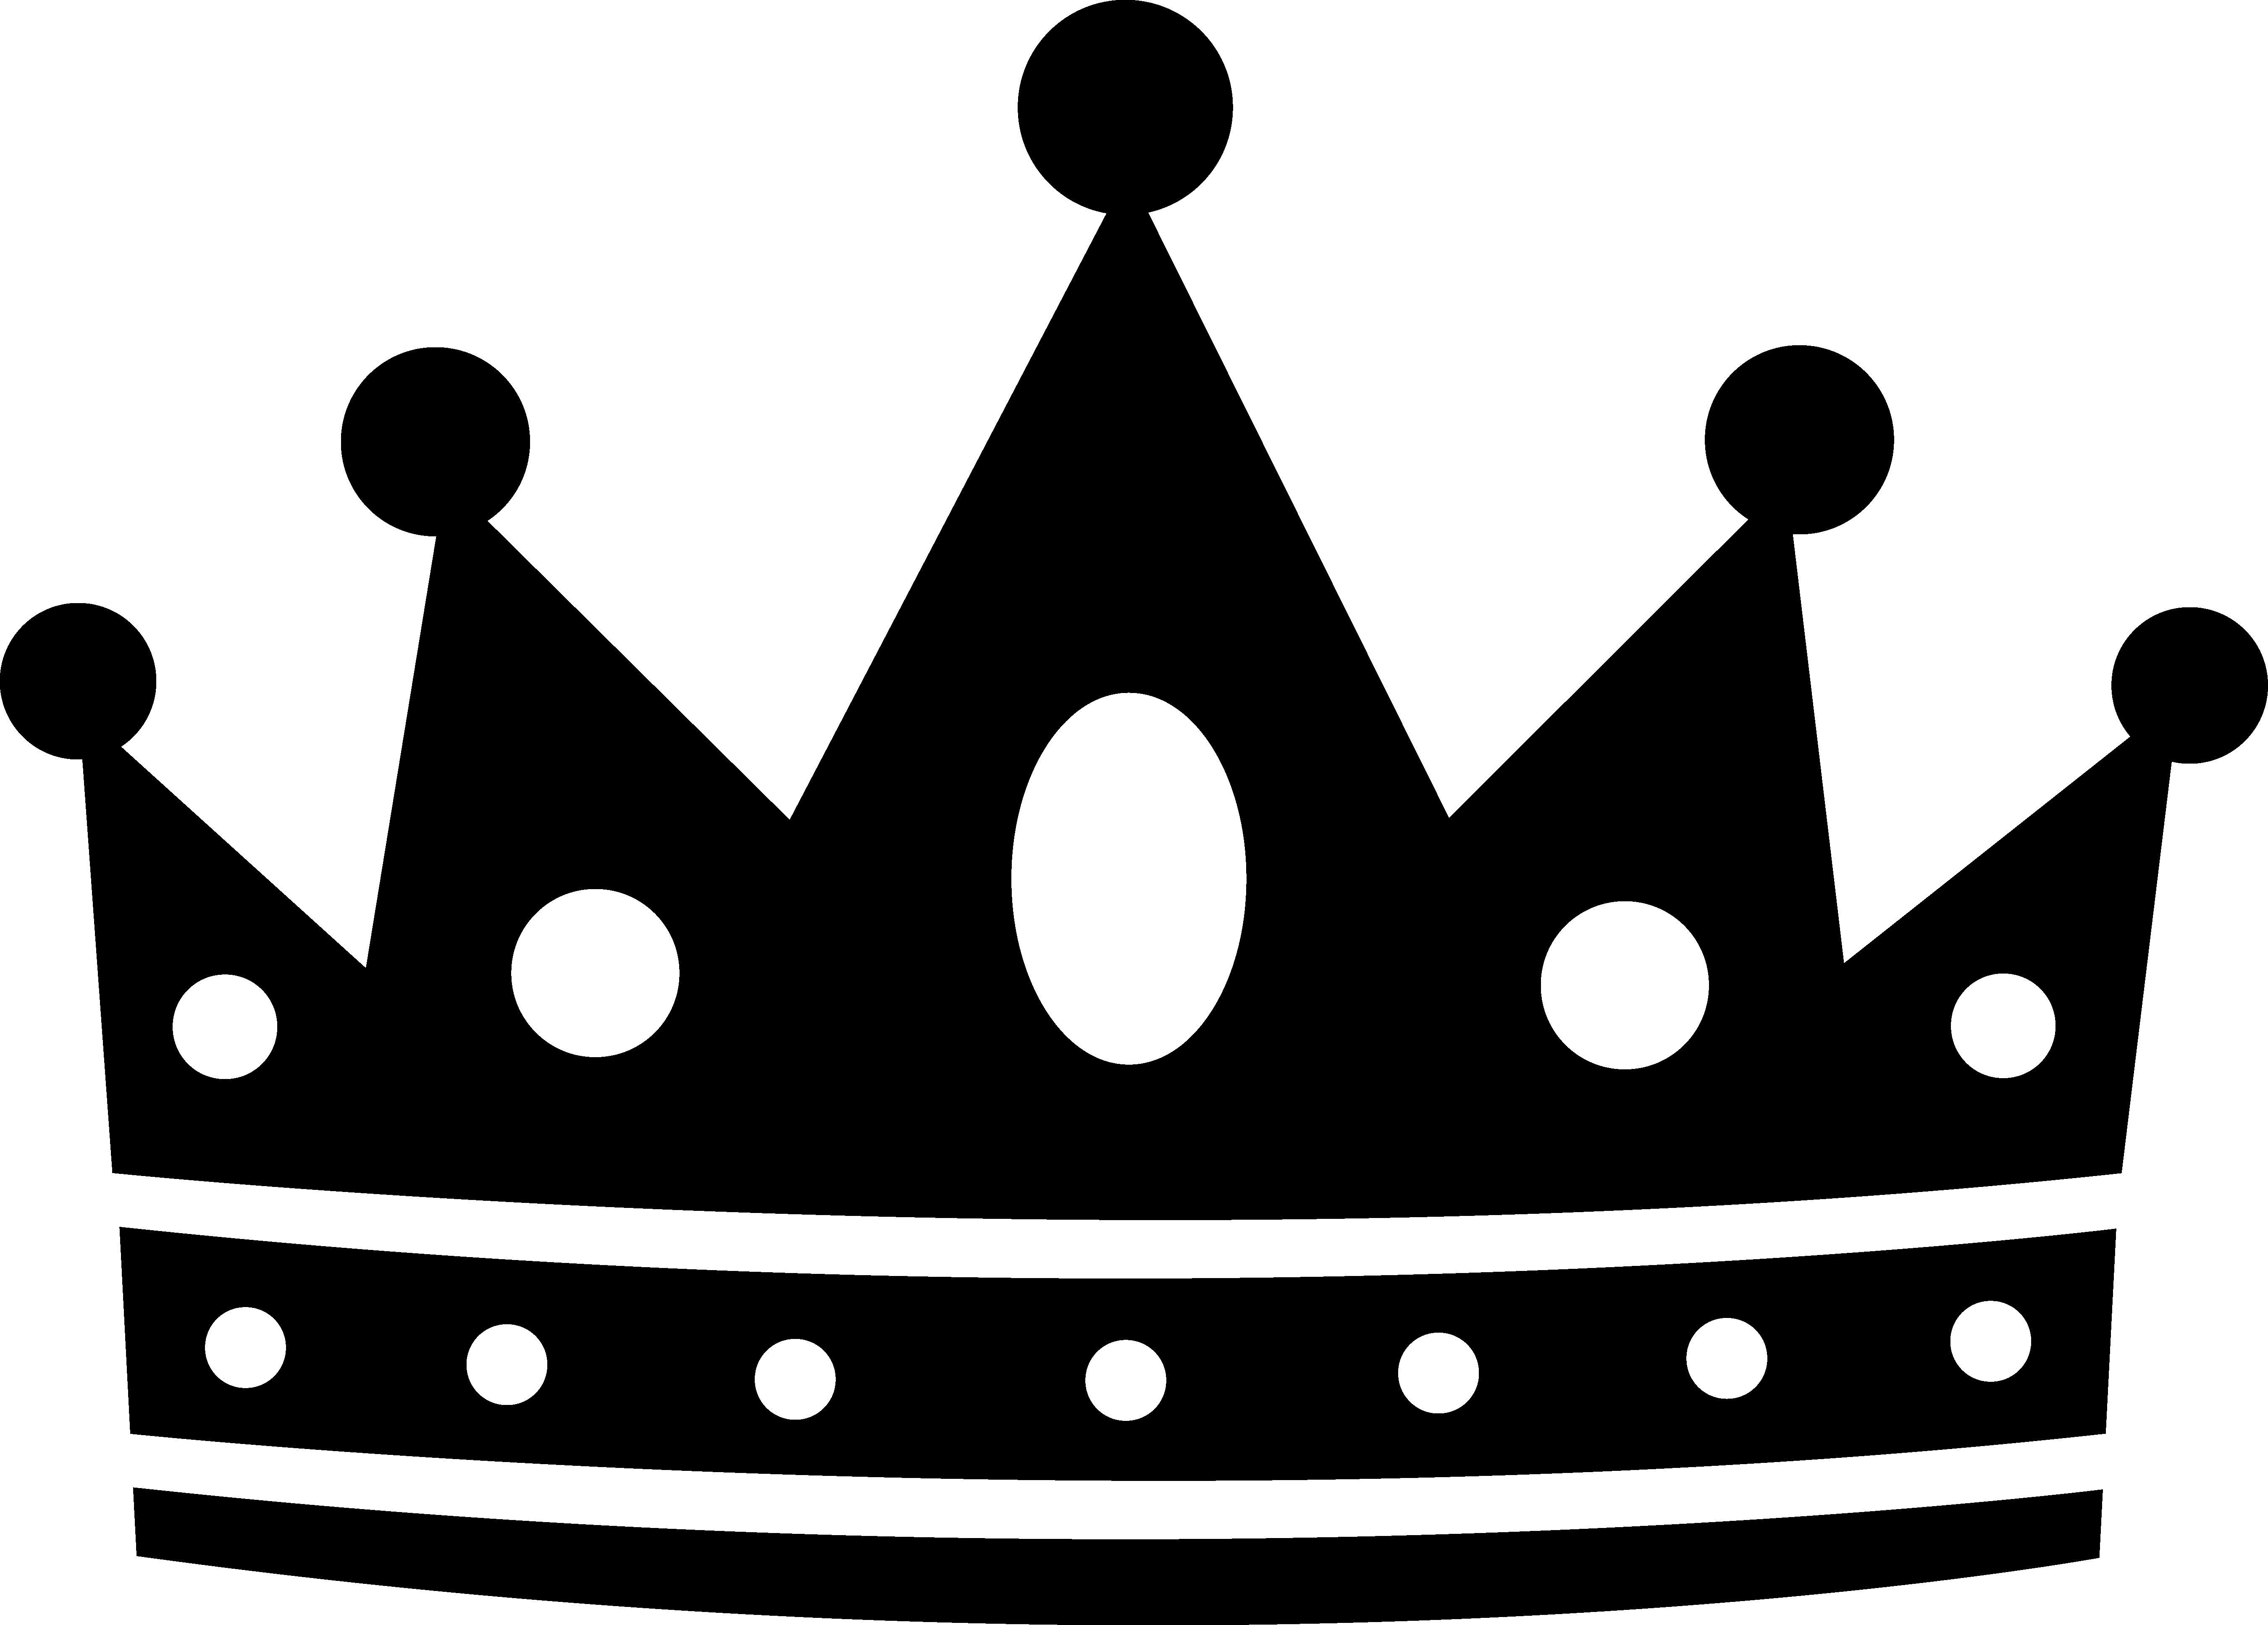 king crown clip art black and - King Crown Clip Art